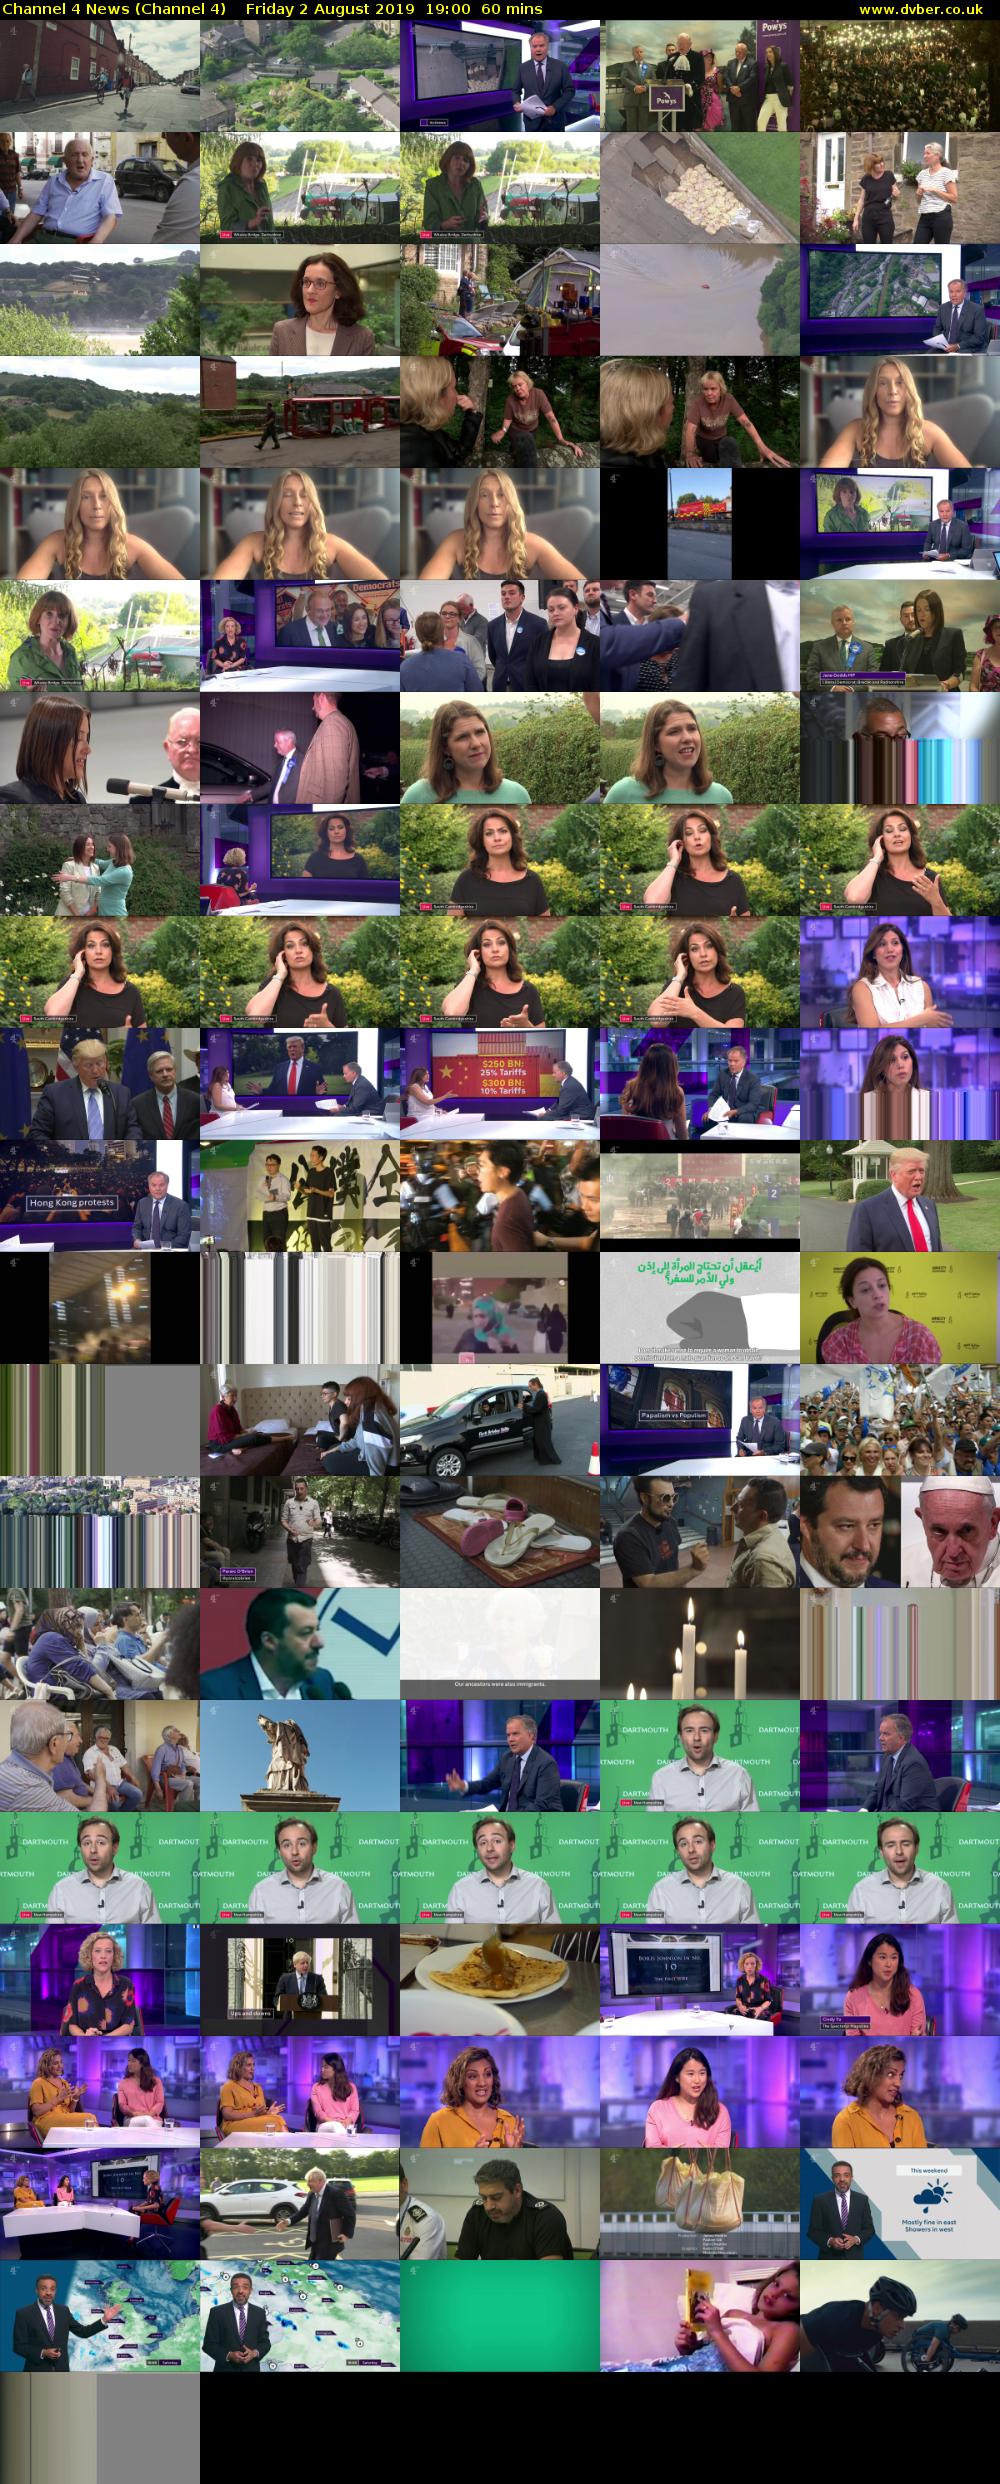 Channel 4 News (Channel 4) Friday 2 August 2019 19:00 - 20:00